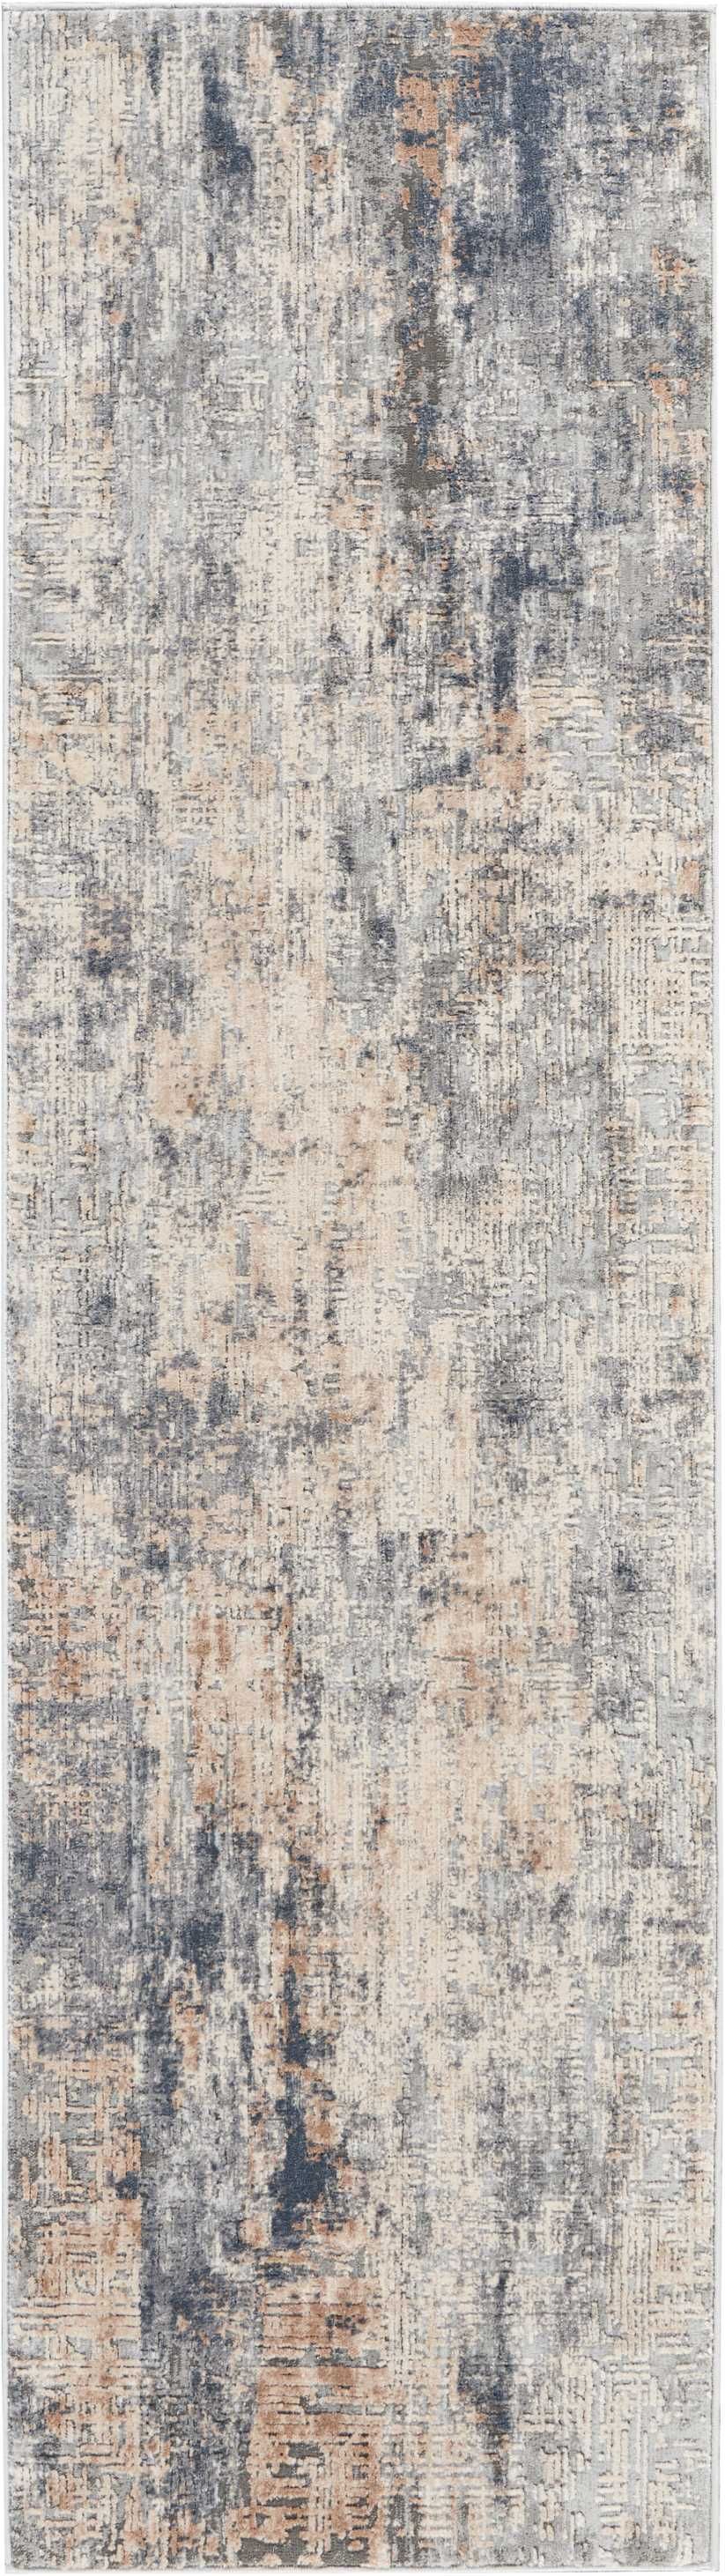 Contemporary & Transitional Rugs RUSTIC TEXTURES RUS01 GRYBG Lt. Grey - Grey & Ivory - Beige Machine Made Rug